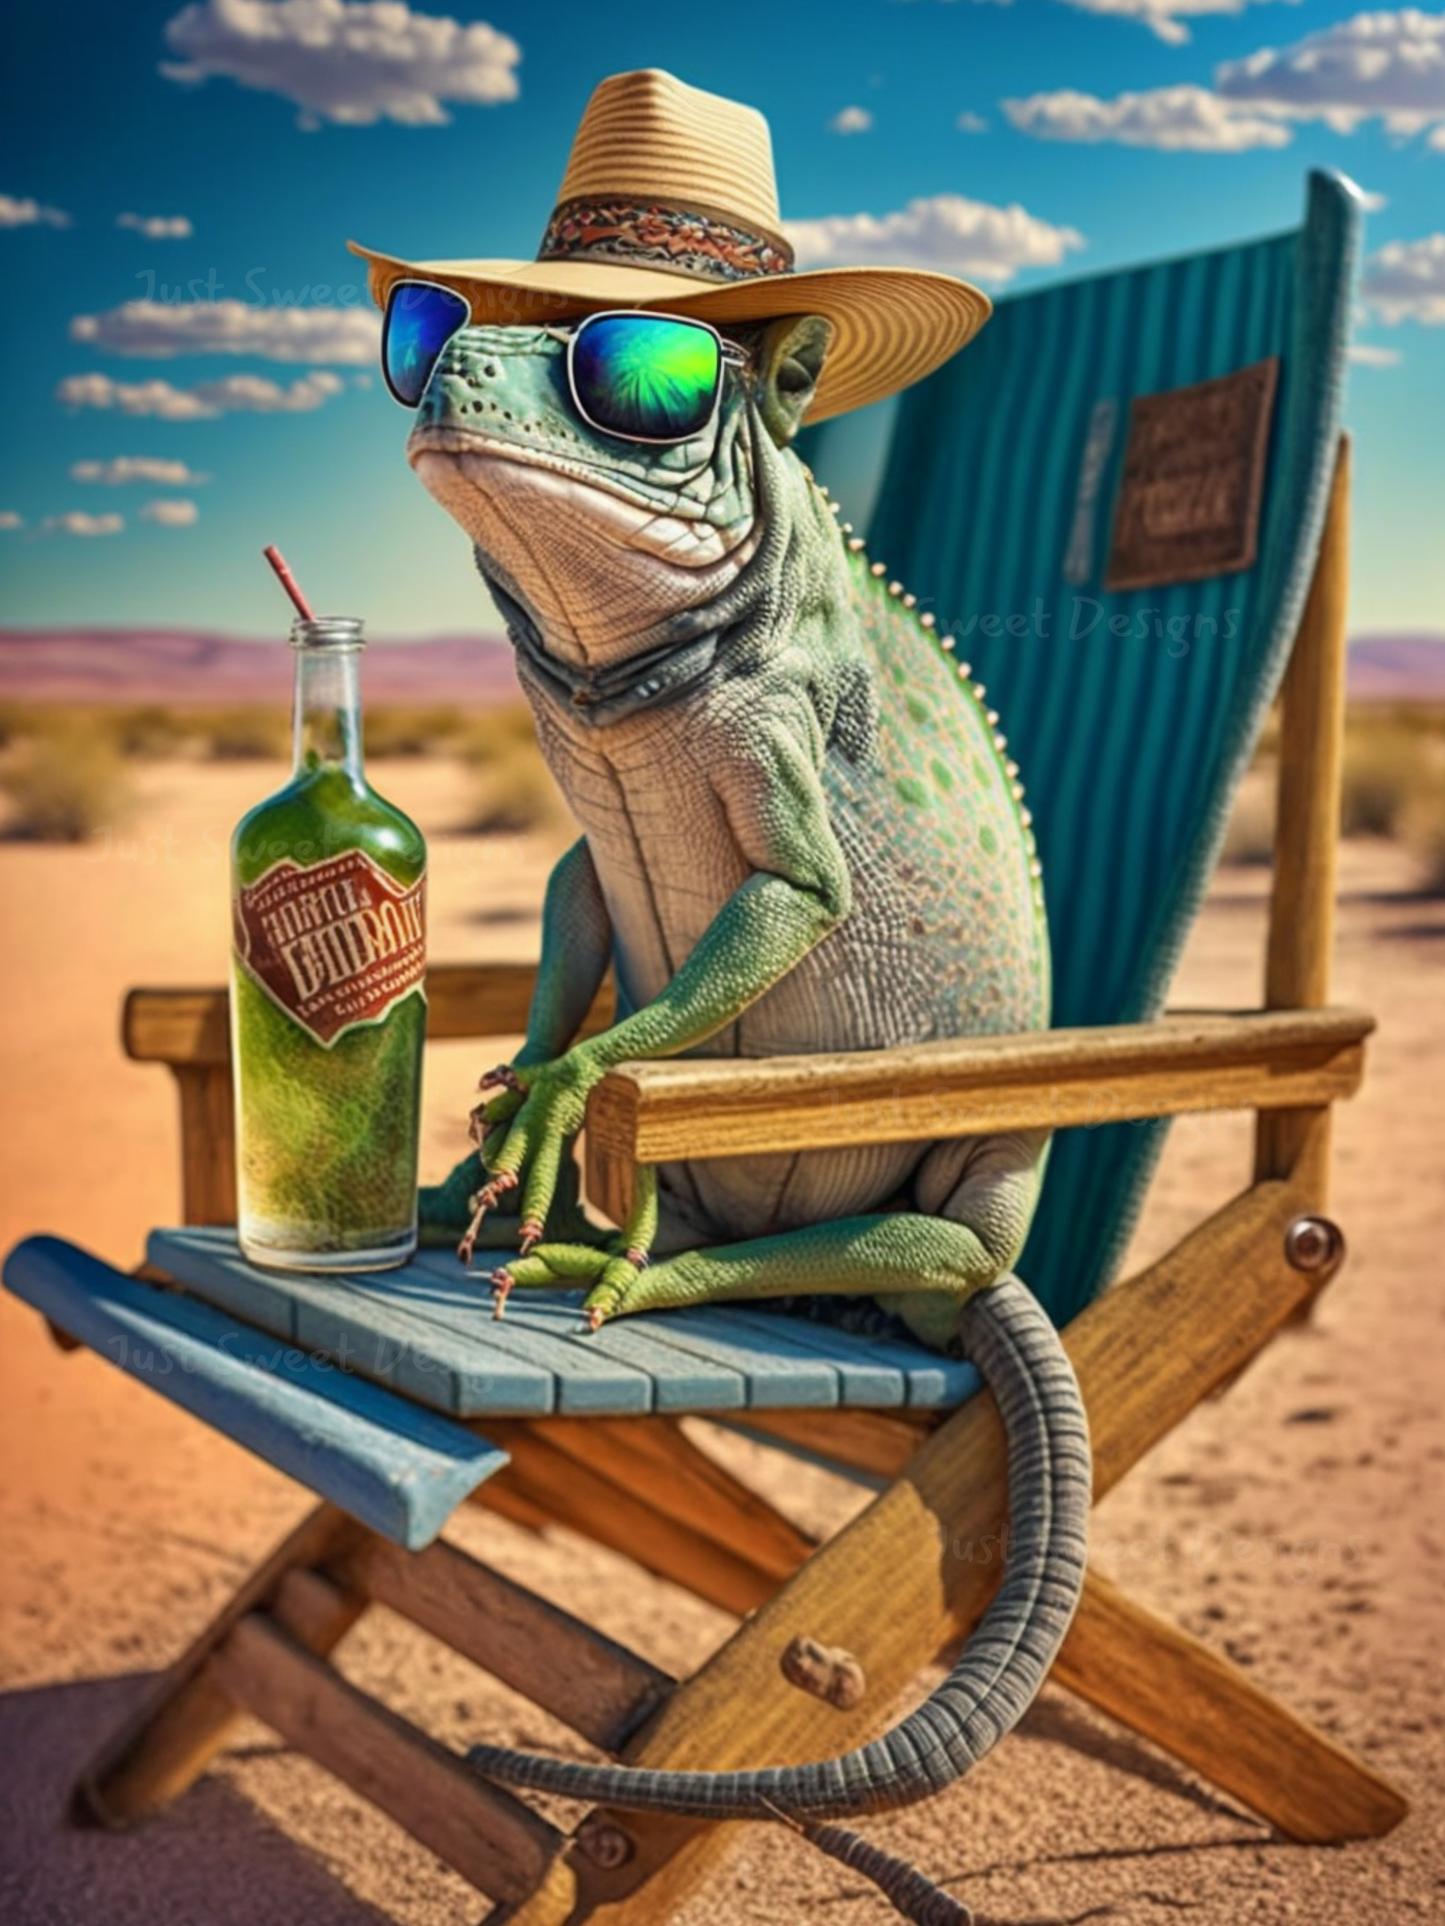 Funny Chameleon relaxing on a deck chair  wall art 